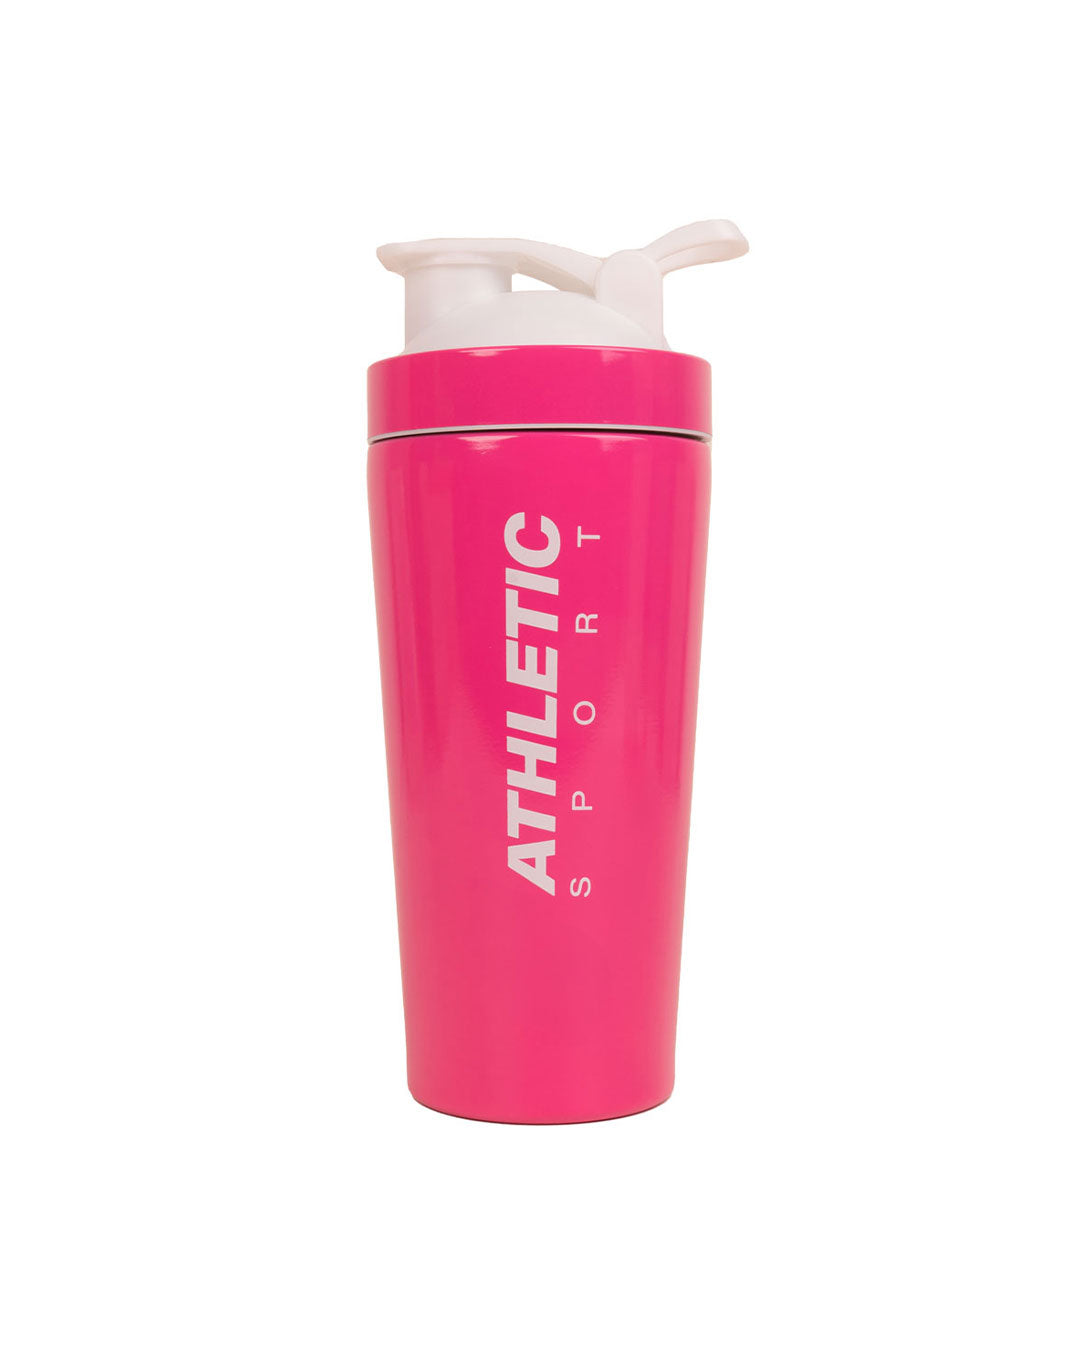 Stainless Steel Shaker - Limited Edition - Hot Pink & White 750ml